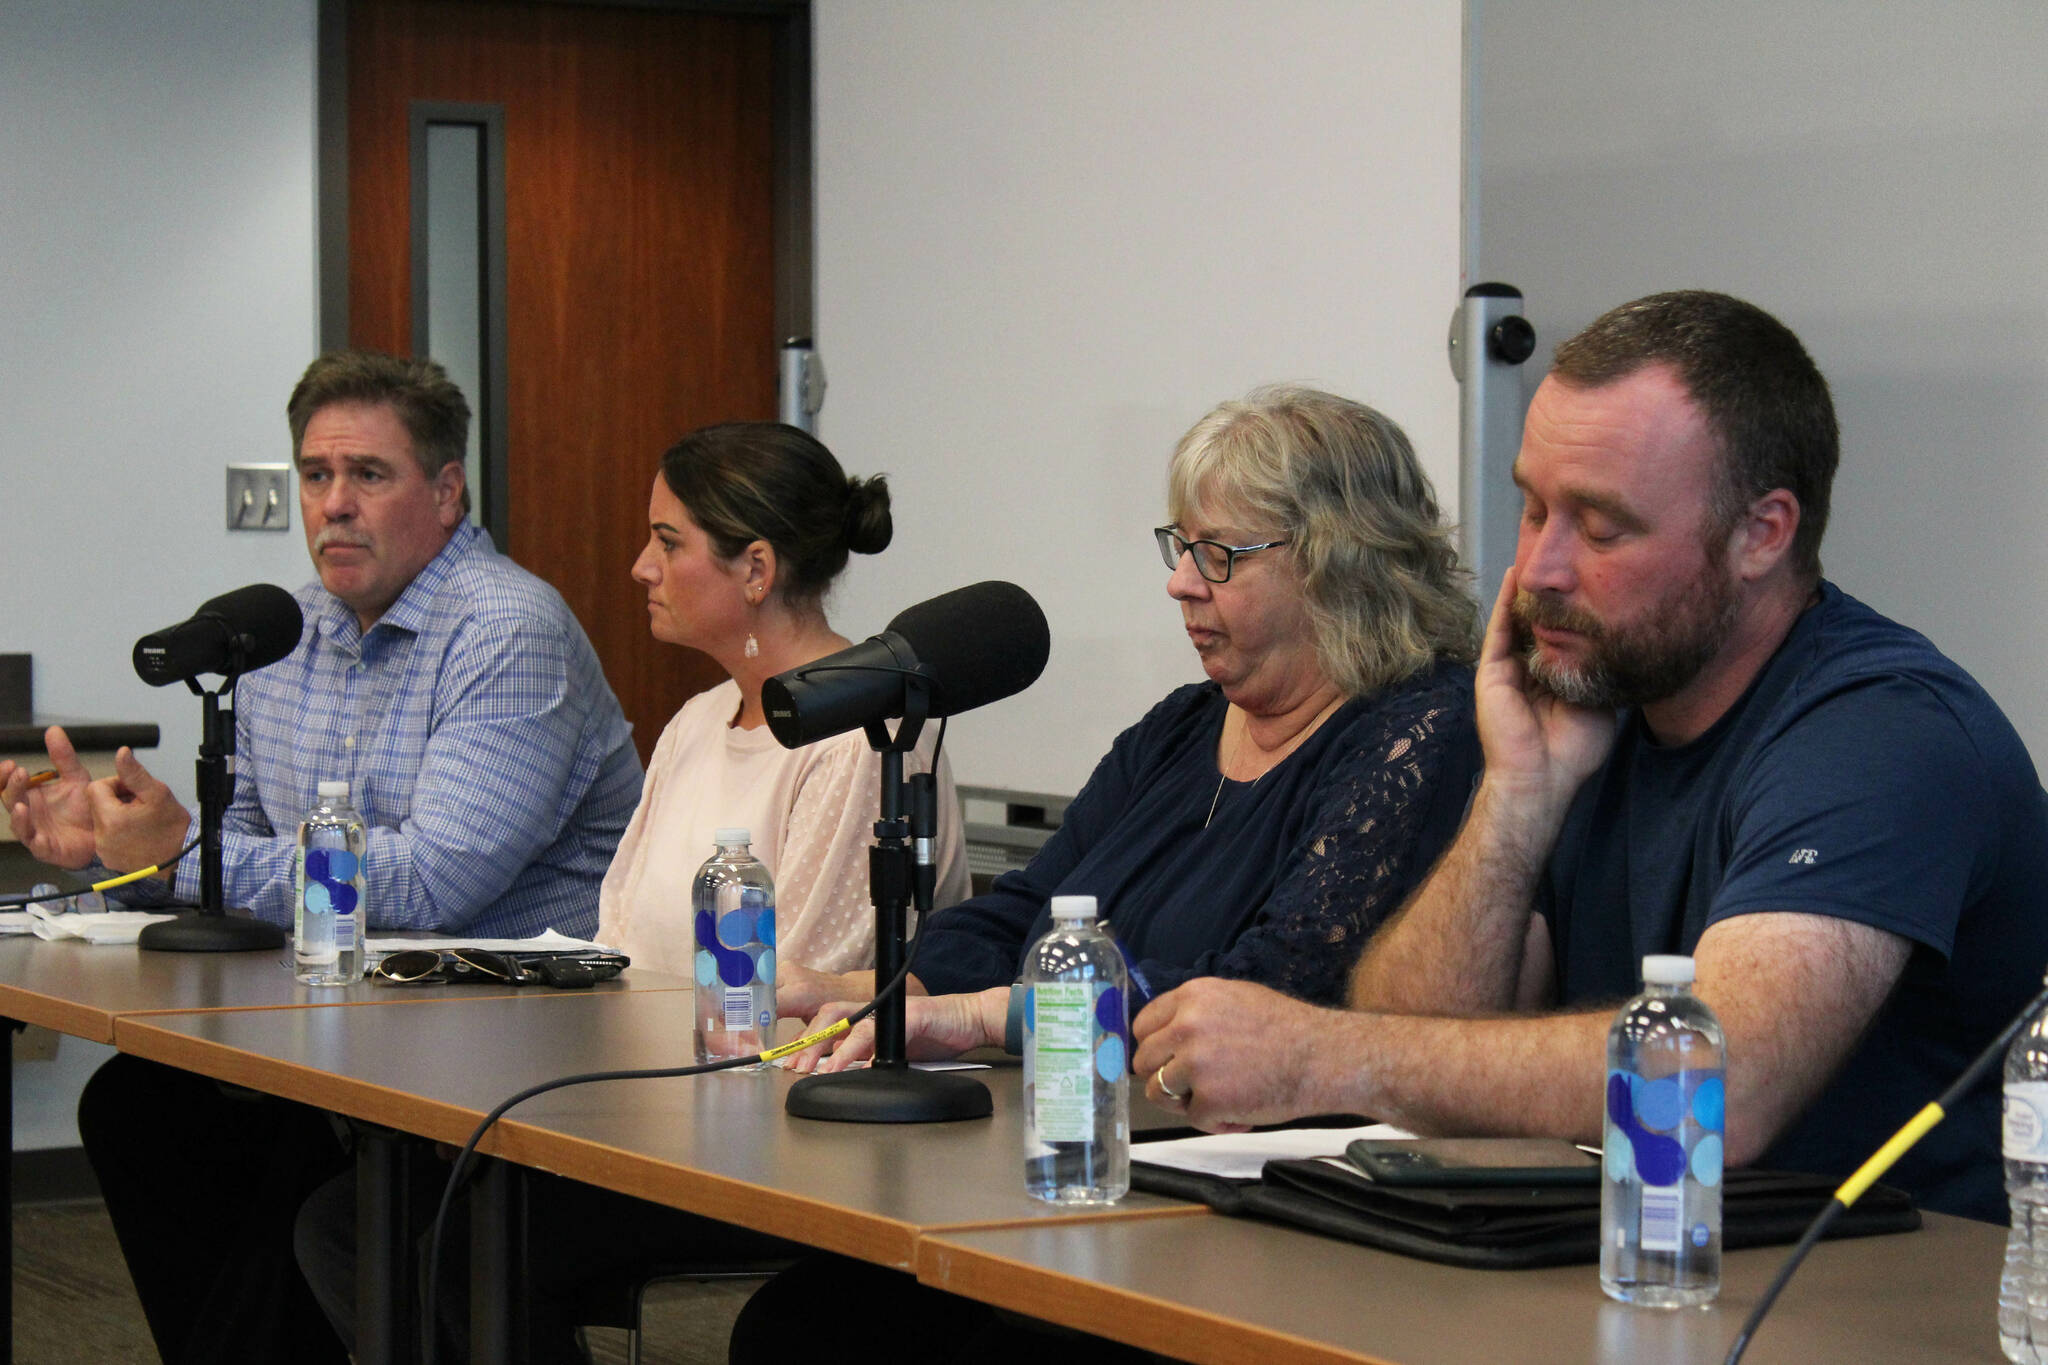 From left, Kenai city mayoral candidates Brian Gabriel and Teea Winger, as well as council candidates Victoria Askin and Alex Douthit participate in a candidate forum at the Soldotna Public Library on Monday, Aug. 29, 2022 in Soldotna, Alaska. (Ashlyn O’Hara/Peninsula Clarion)